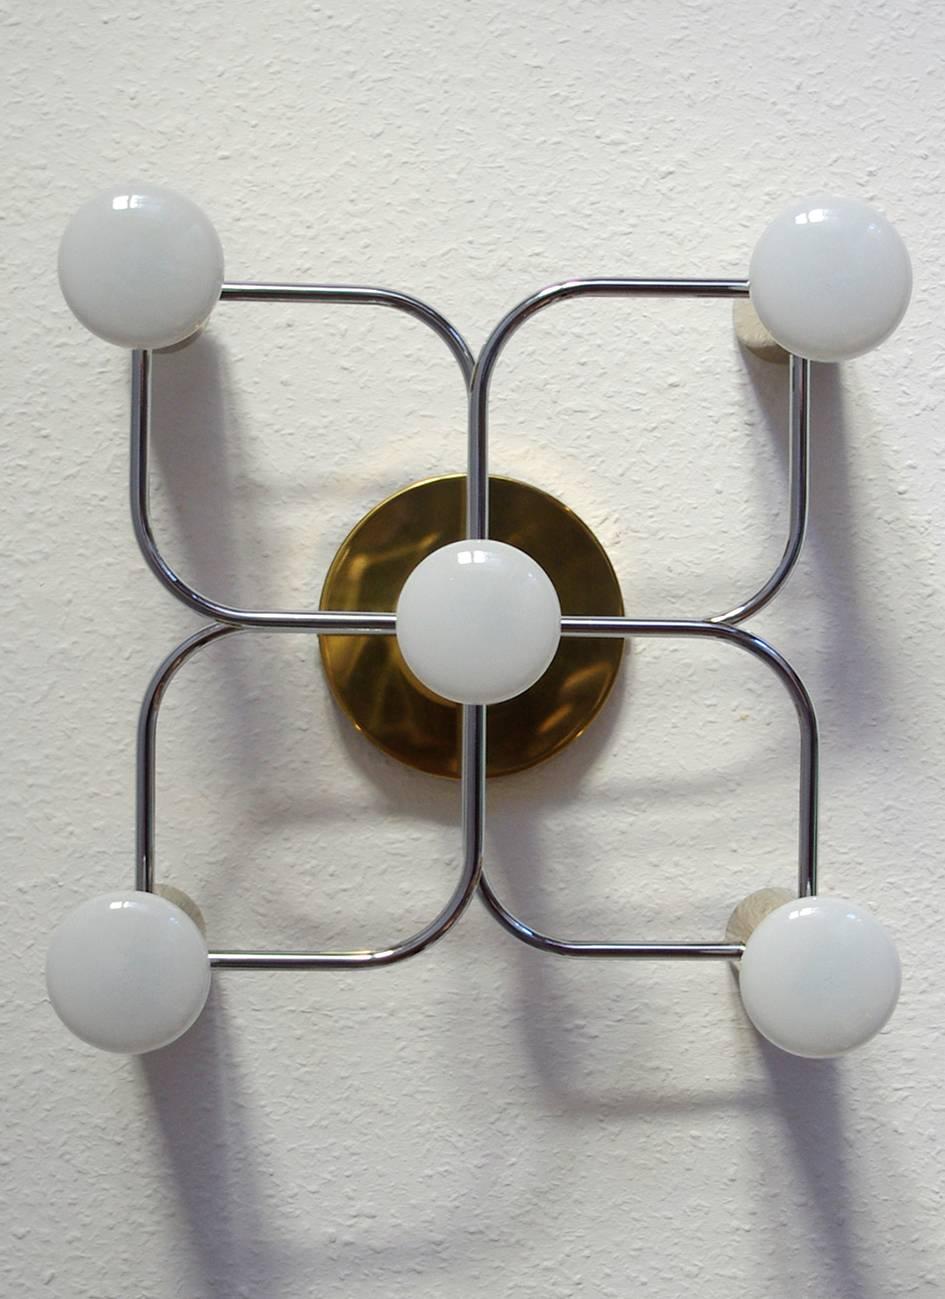 Beautiful sculptural Sciolari style ceiling or wall flush mount by Leola.
Germany, 1960s.
Polished brass and chrome version. Height: 13.8 in, width:13.8 in, depth: 7 in.

Other versions and models available (brushed brass, white lacquered,